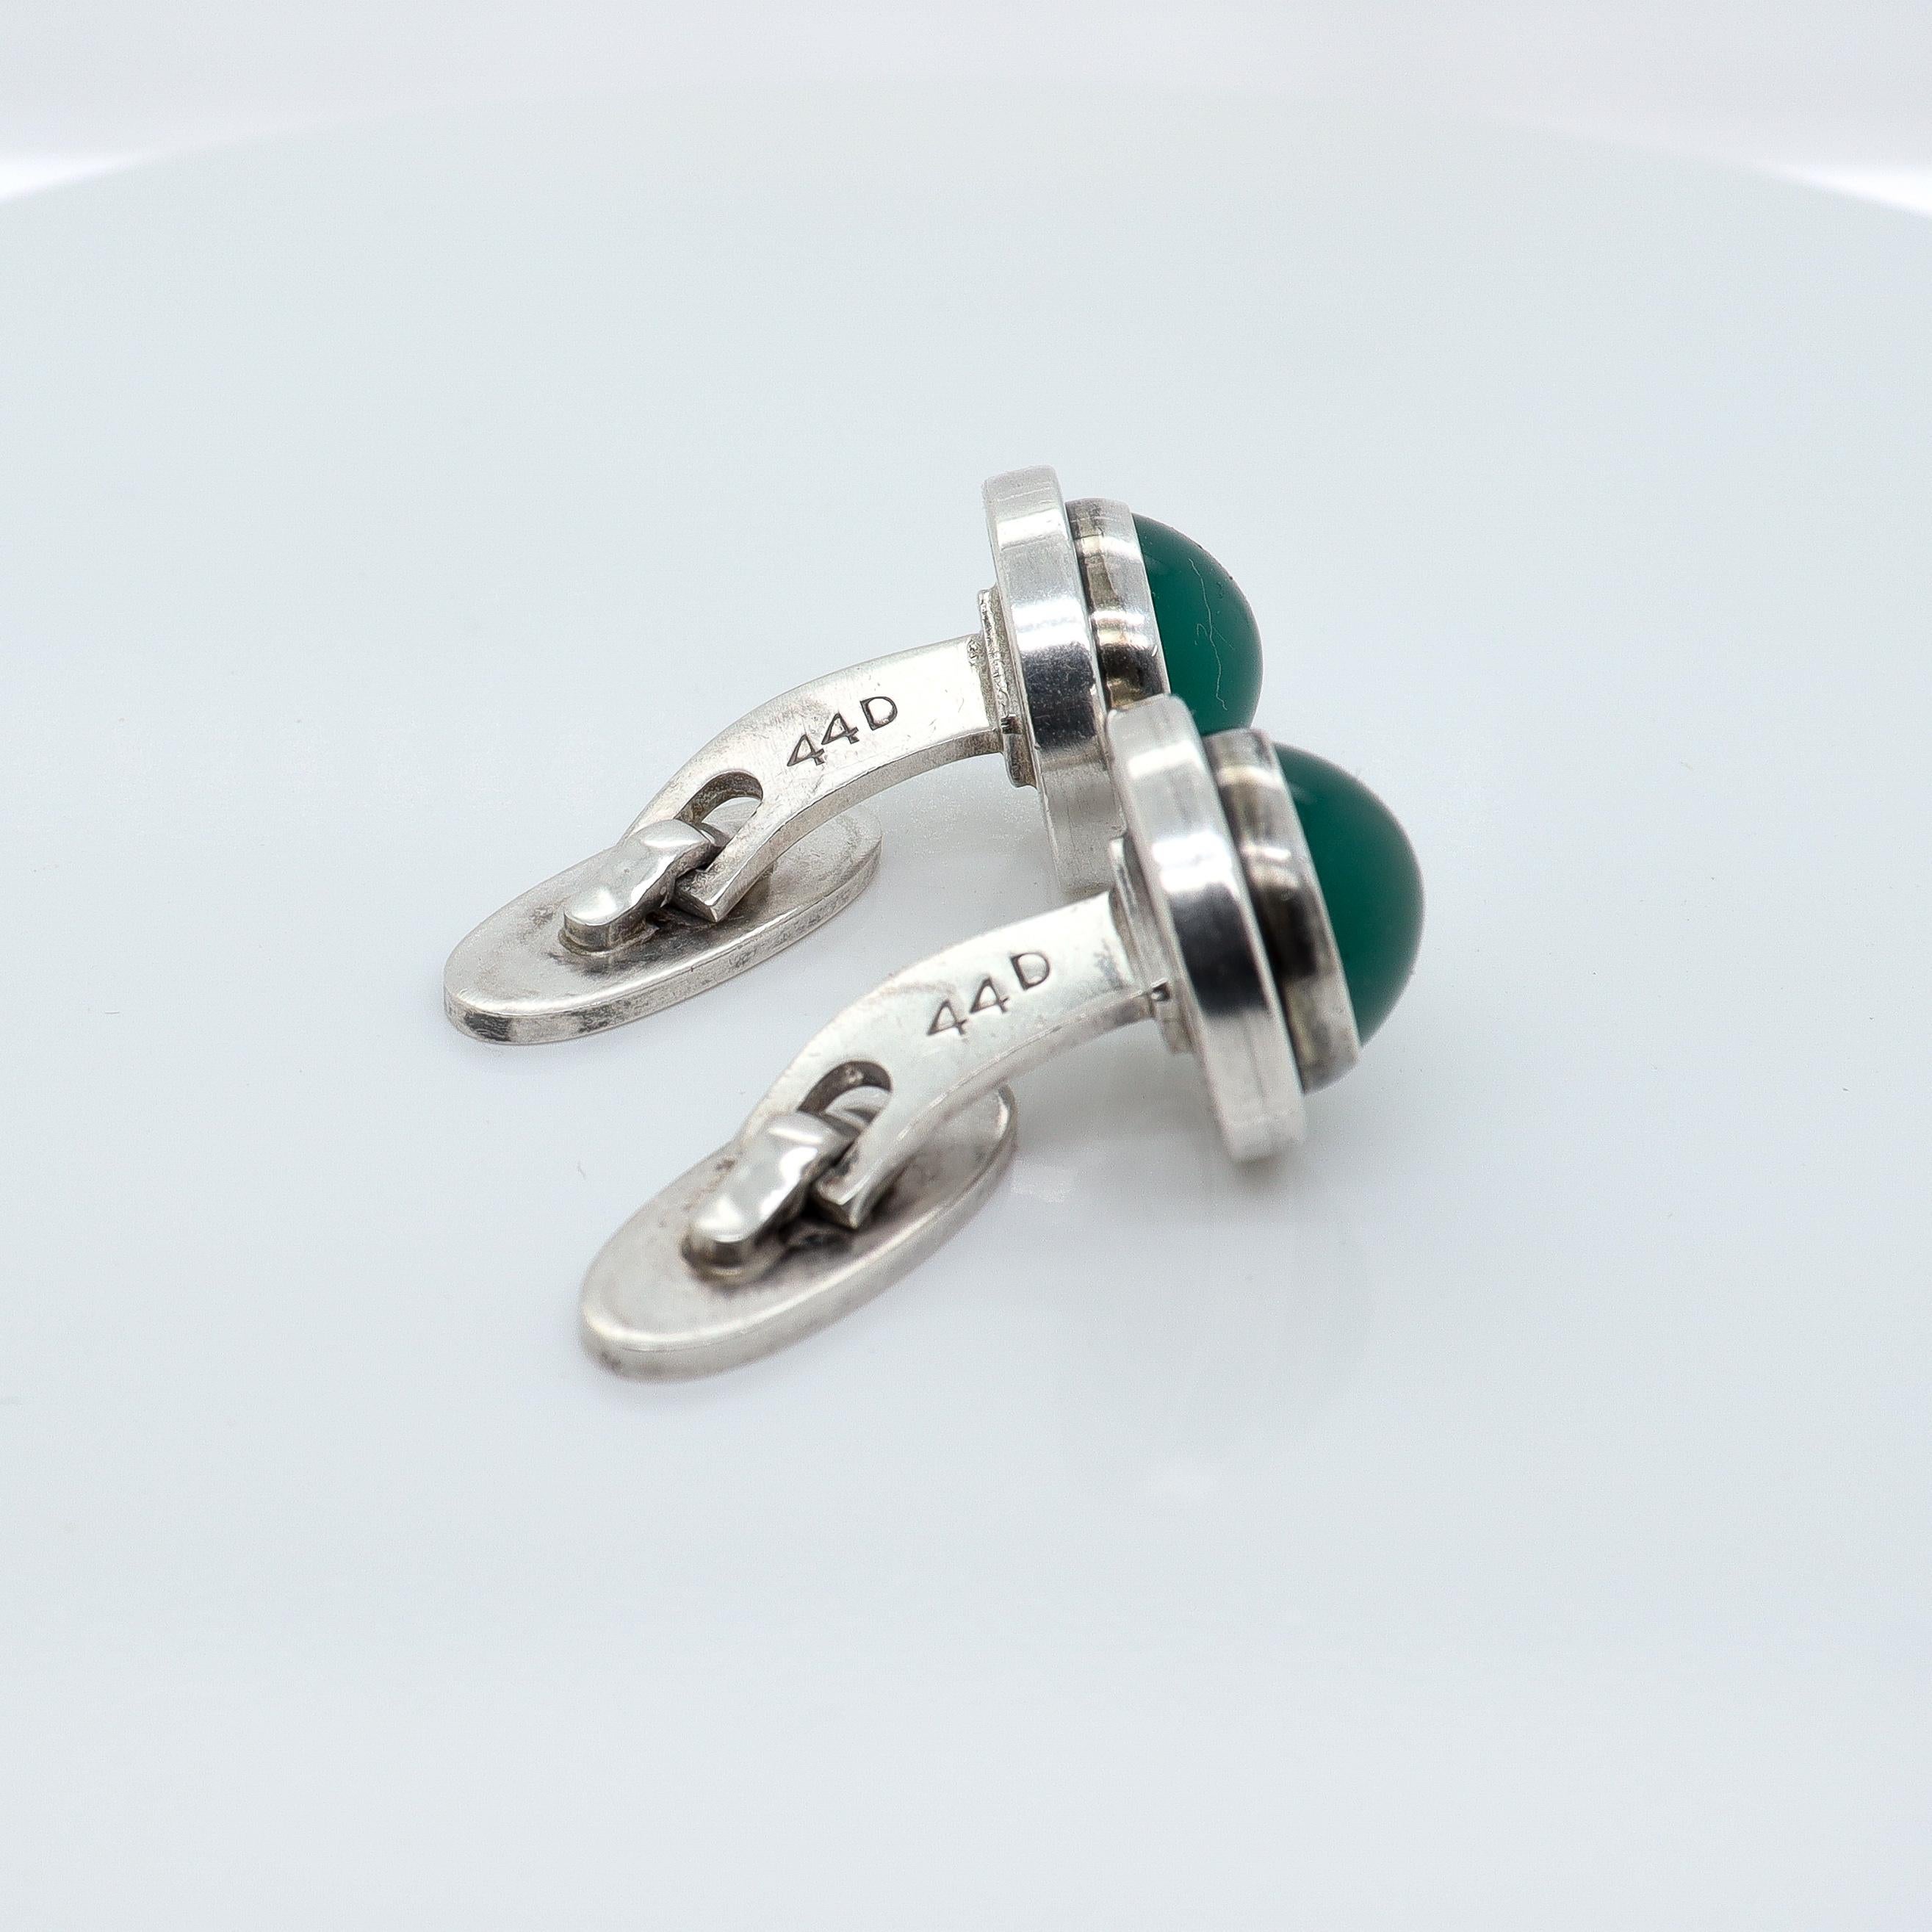 Georg Jensen Sterling Silver Cufflinks Model #44D with Chrysoprase Cabochons For Sale 3